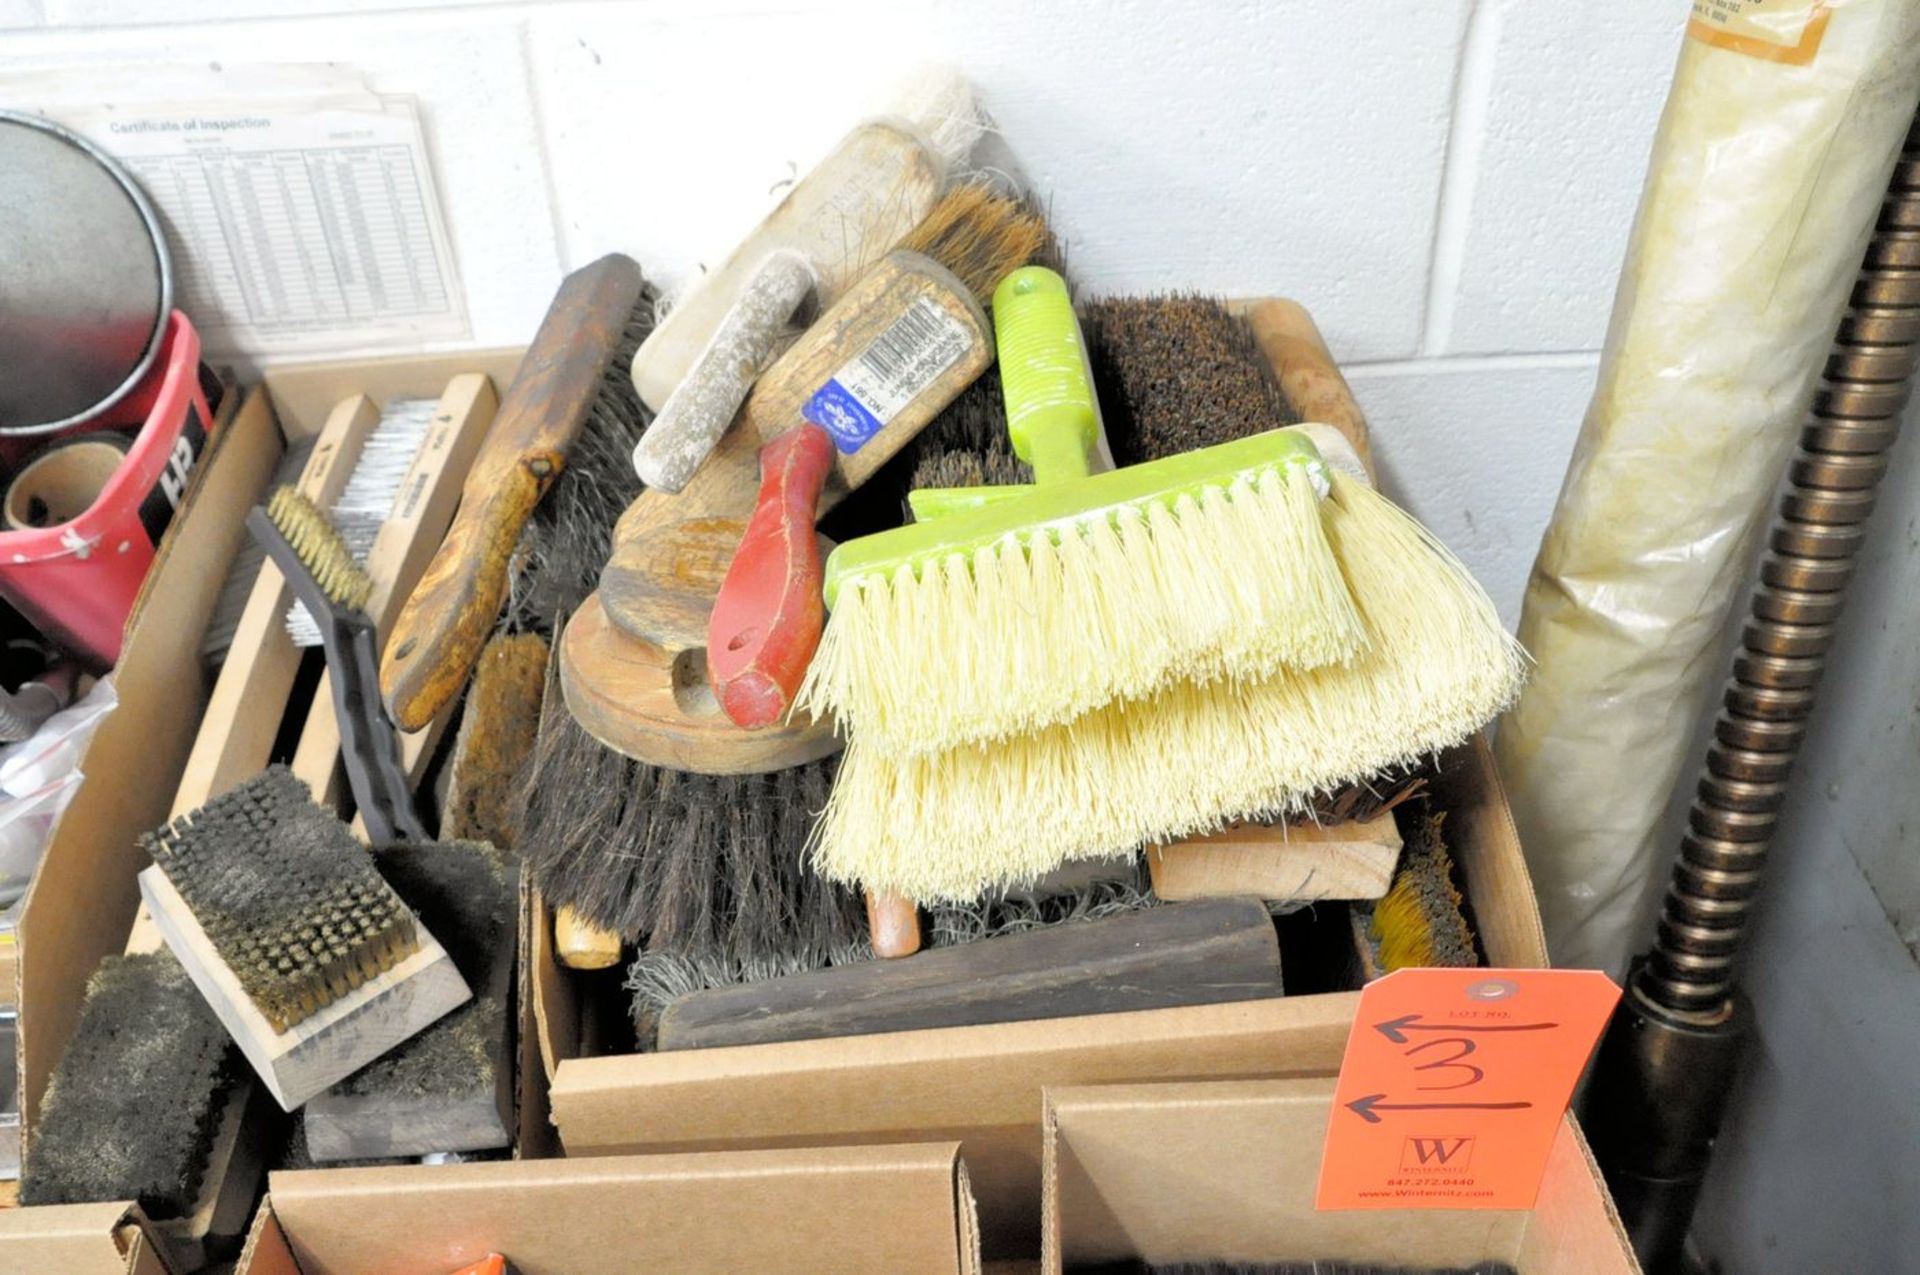 Lot - Brushes, Paint Tray, Paint Sprayer, Wire Strippers, Tape Measures, Utility Knives, - Image 4 of 10